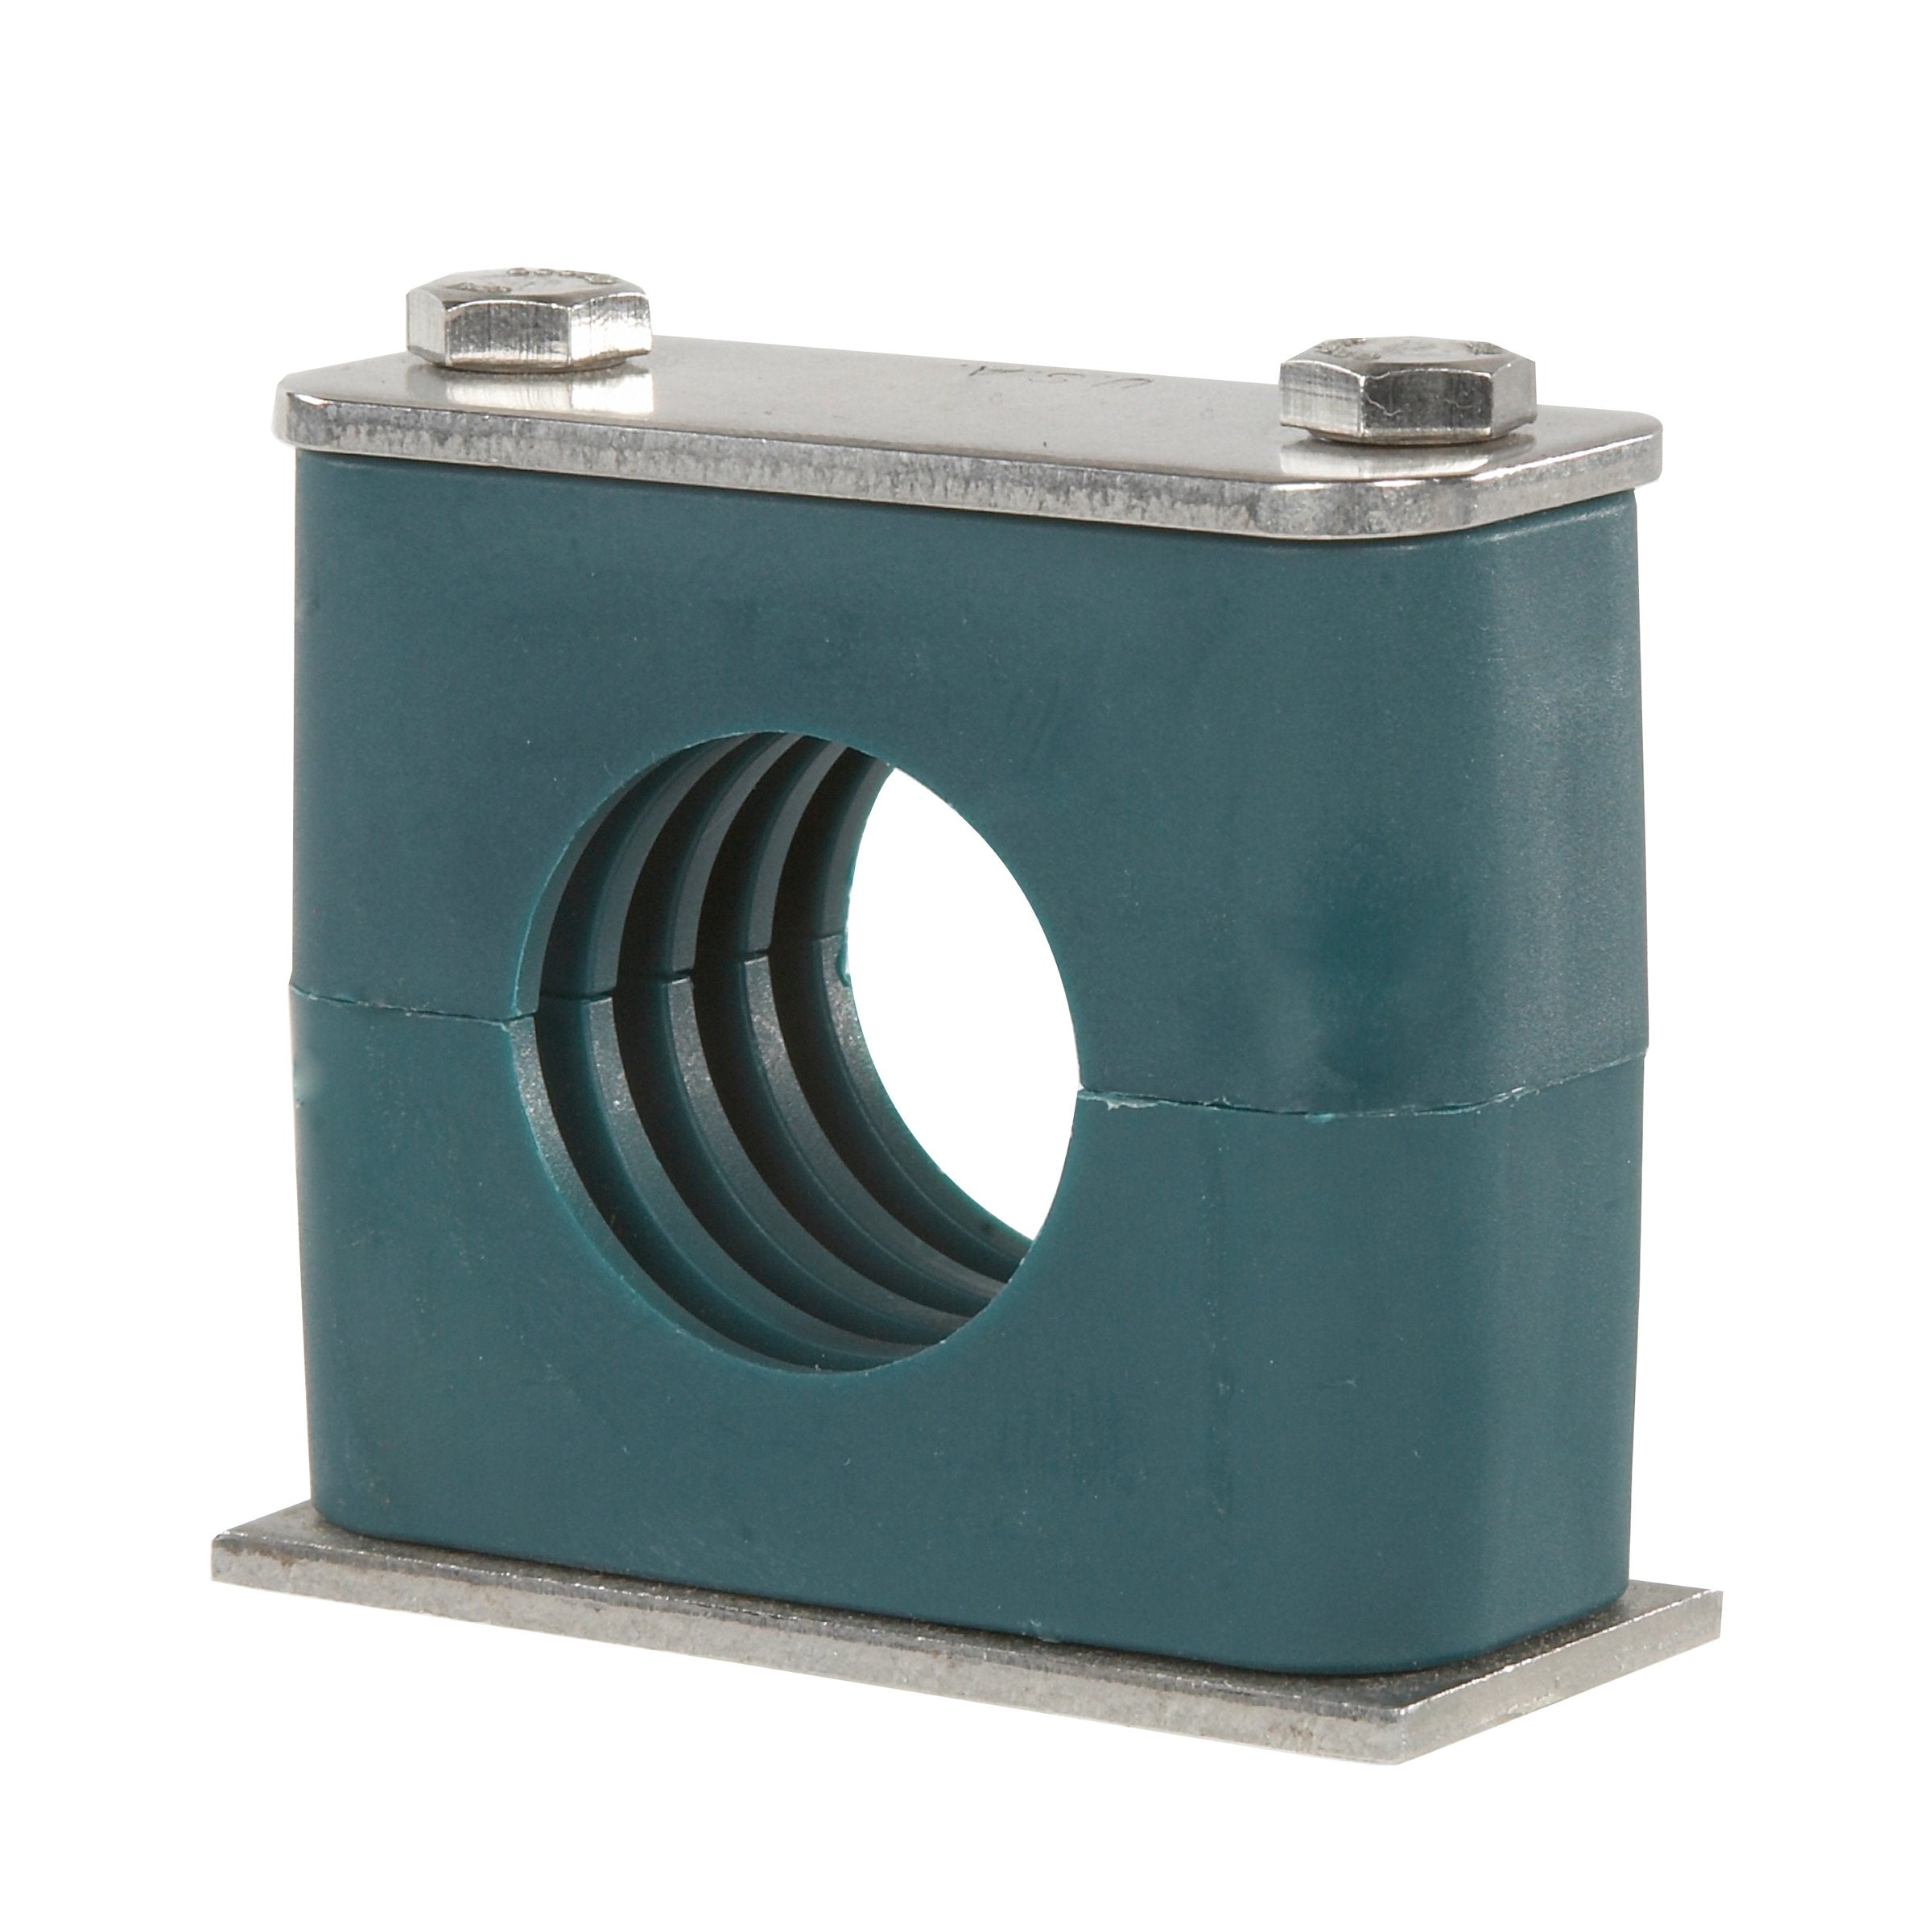 SP-757.2-PP-DP-AS-U-W5 : Stauff Clamp, Single Weld Plate, 2.25 inch (57.2mm) OD, for 2.25" Tube, Green PP Insert, Profiled Interior, 316SS